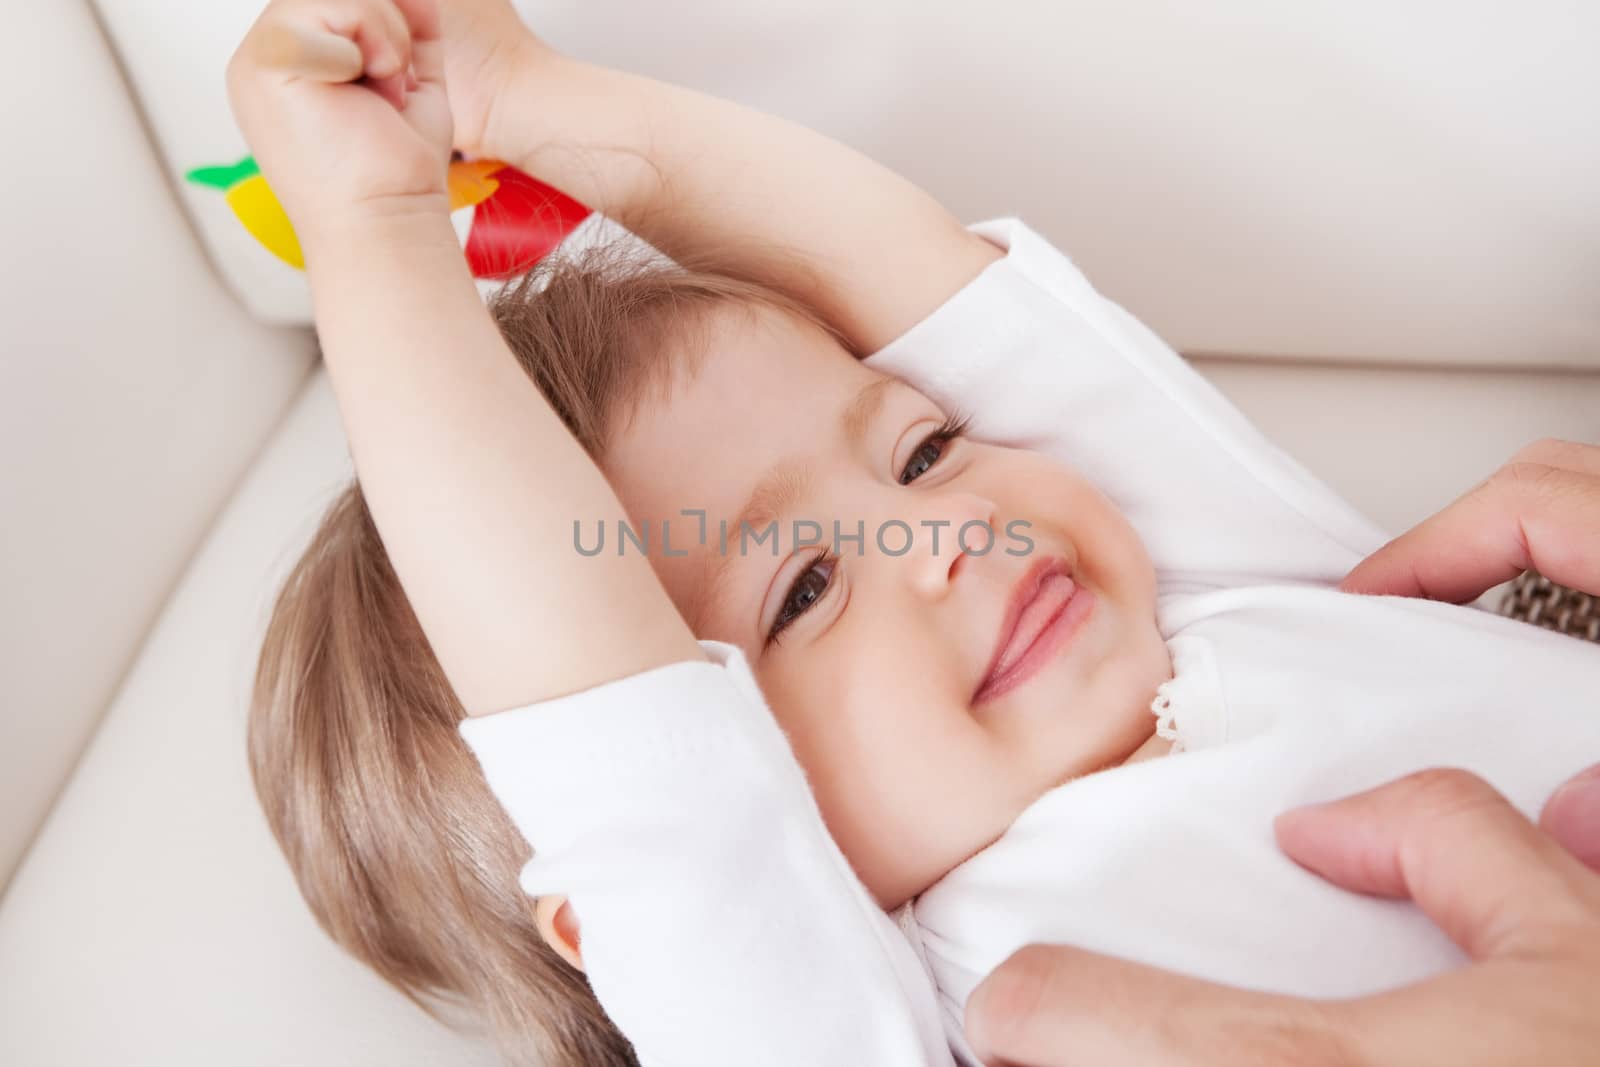 Portrait of a cute innocent young baby smiling and looking with enjoyment